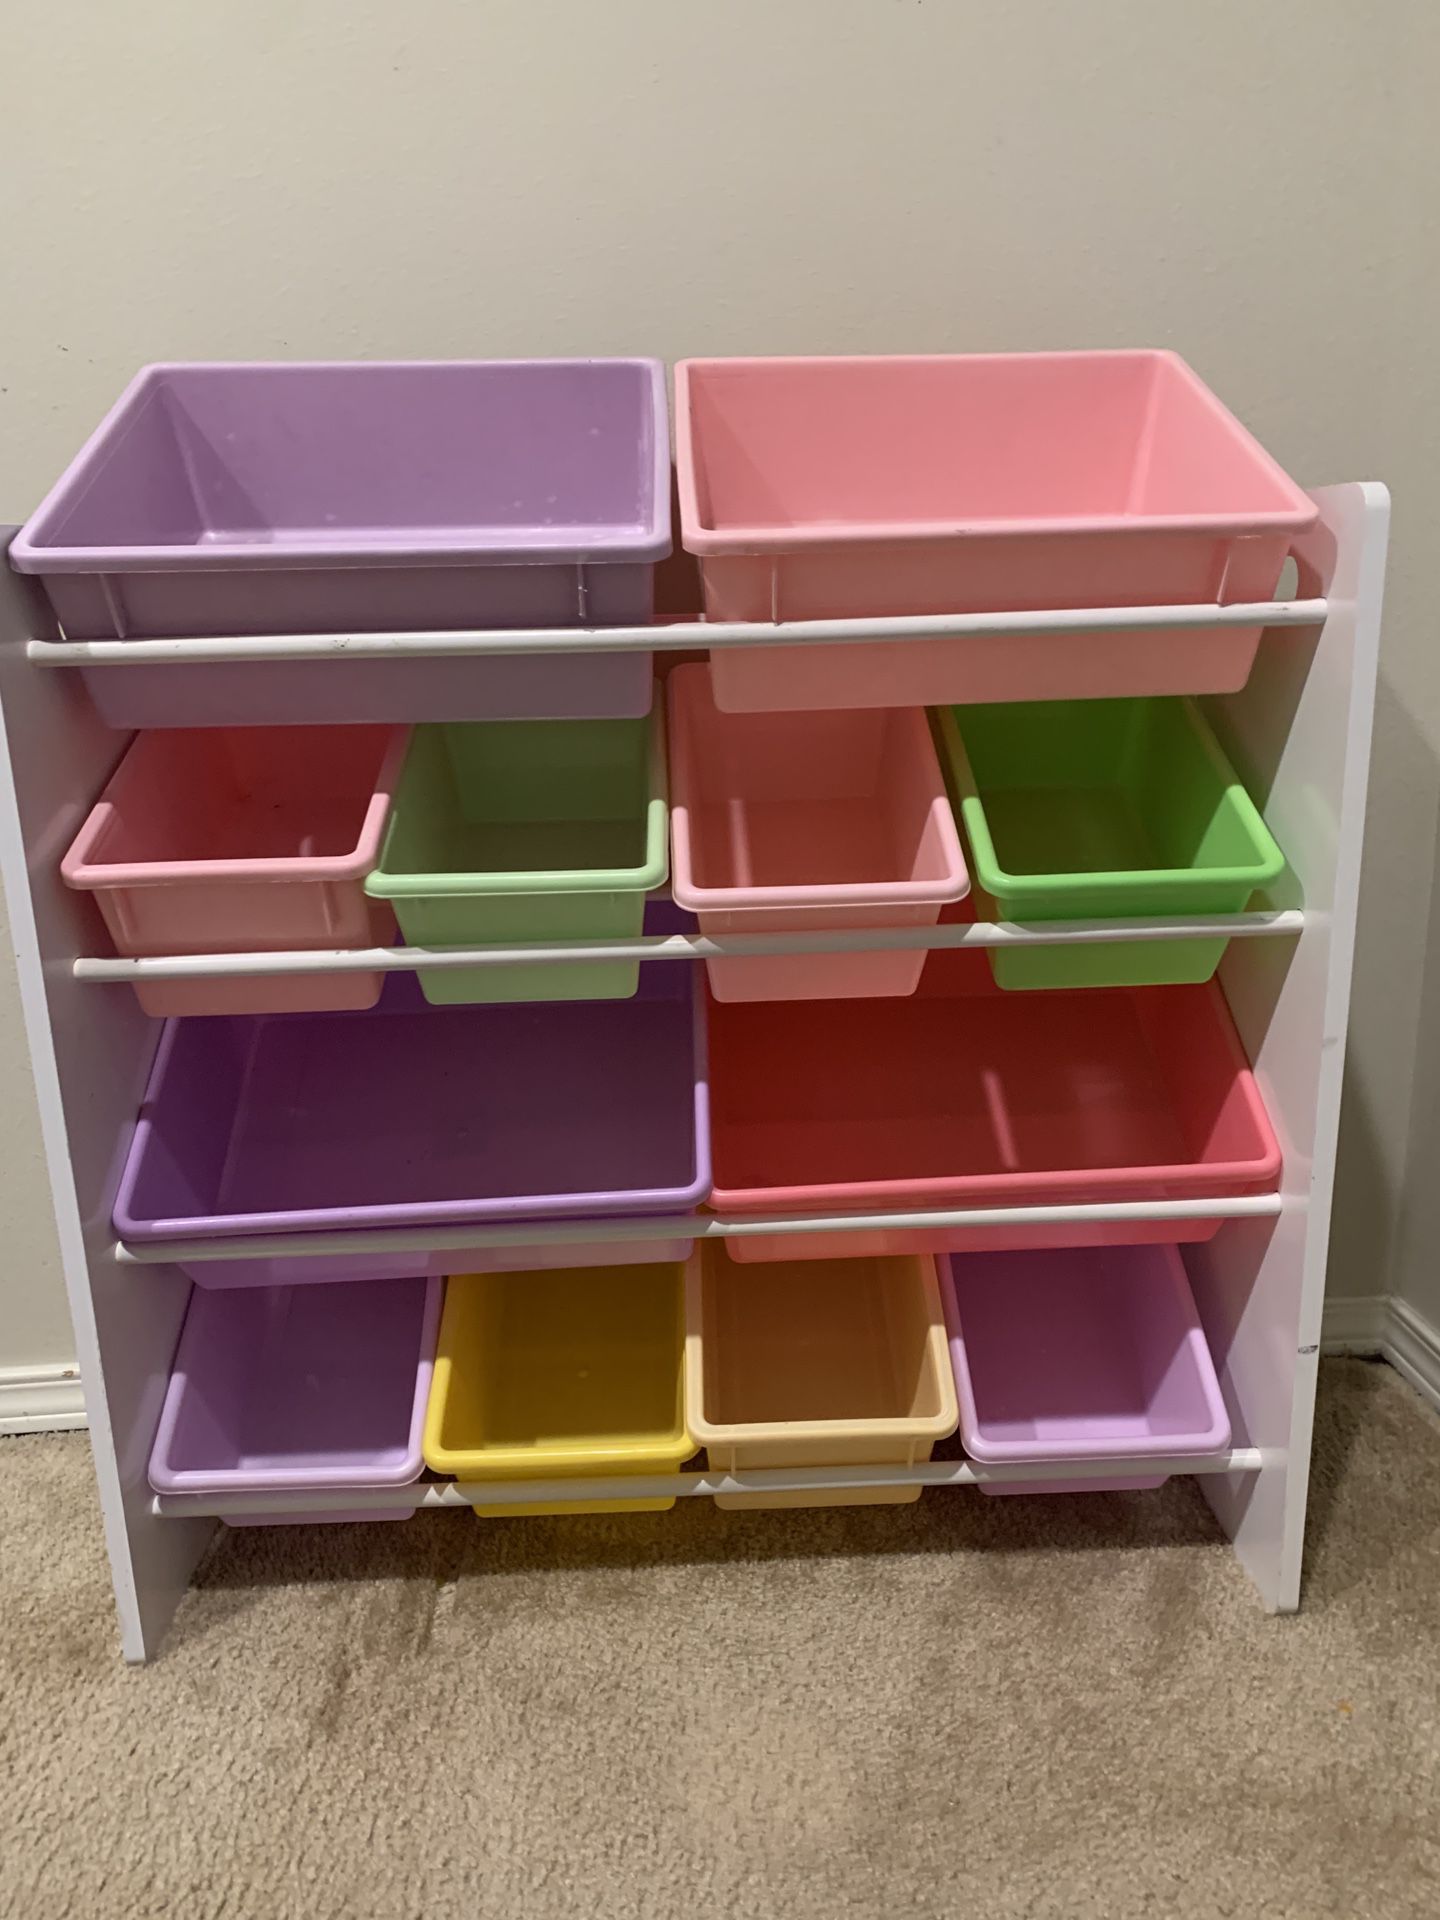 Toy Shelter Rack With Bins.